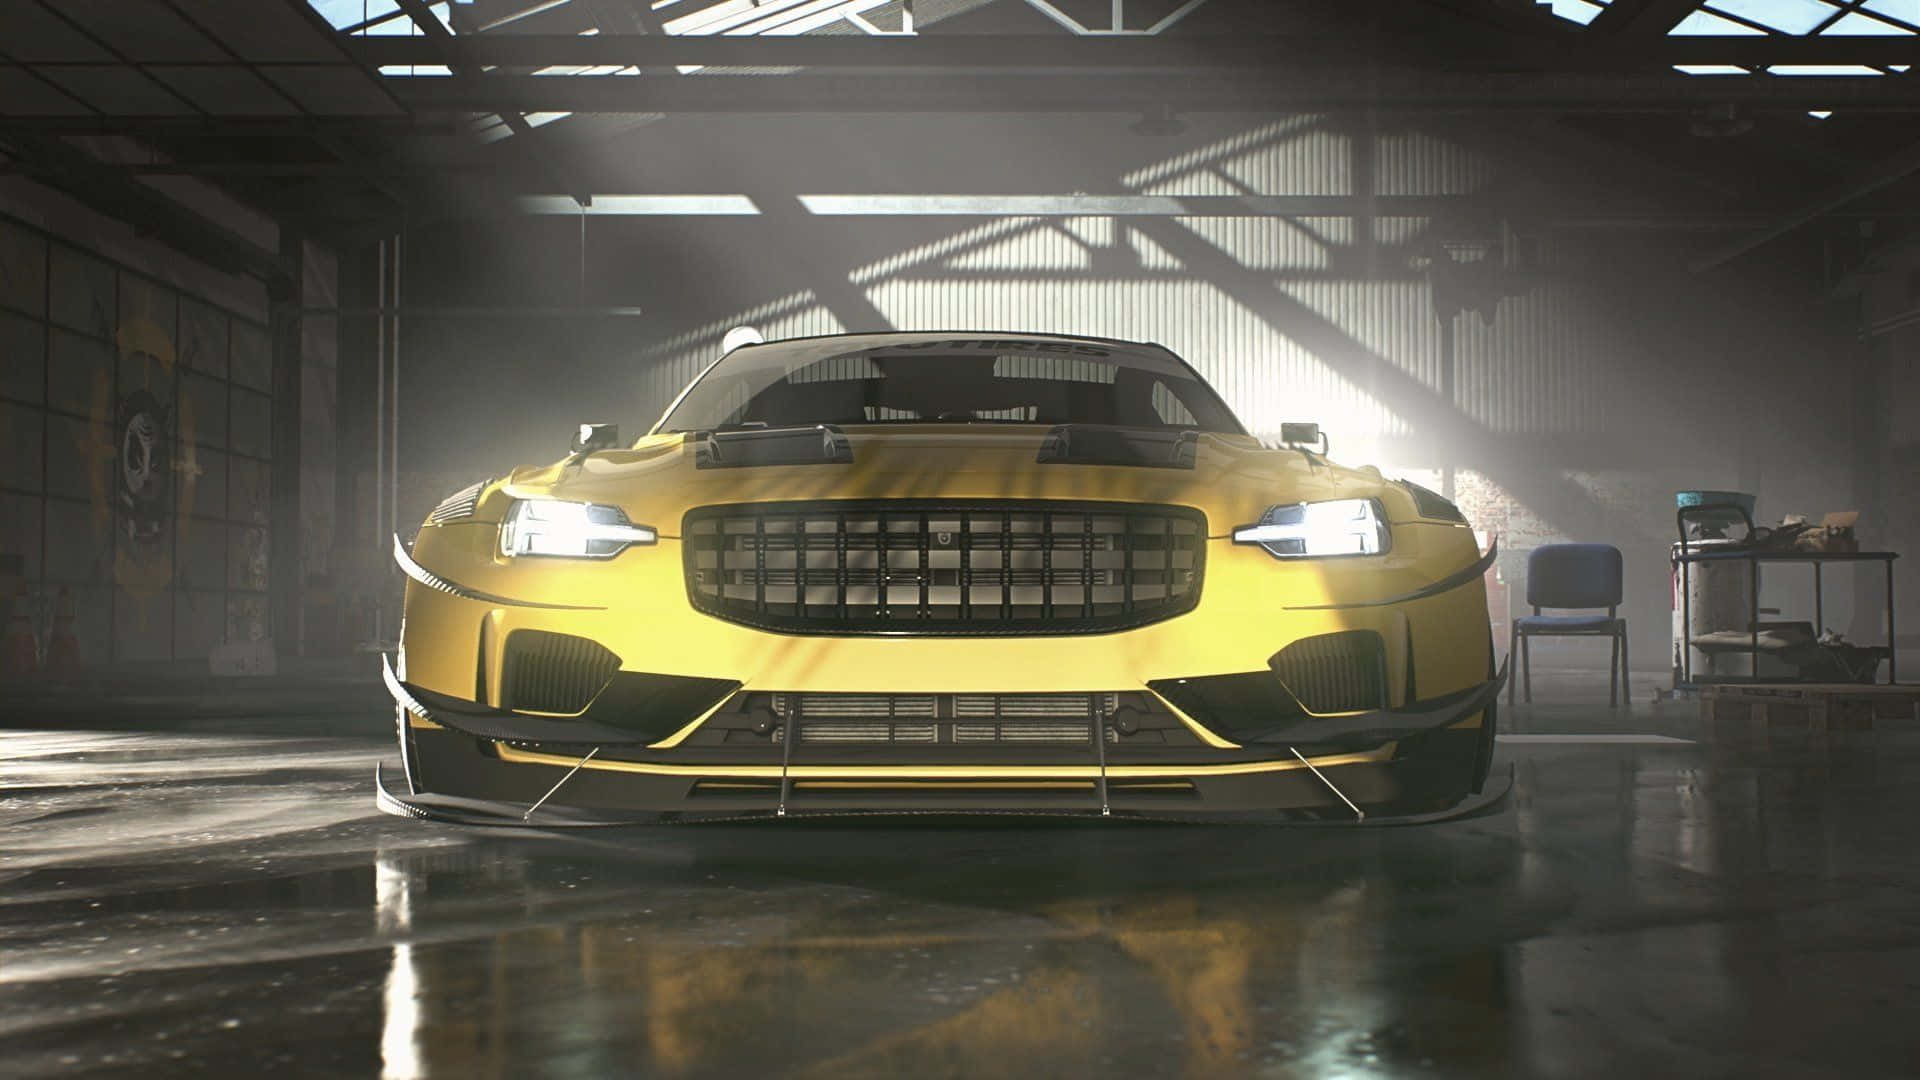 A Yellow Car In A Garage With Lights On